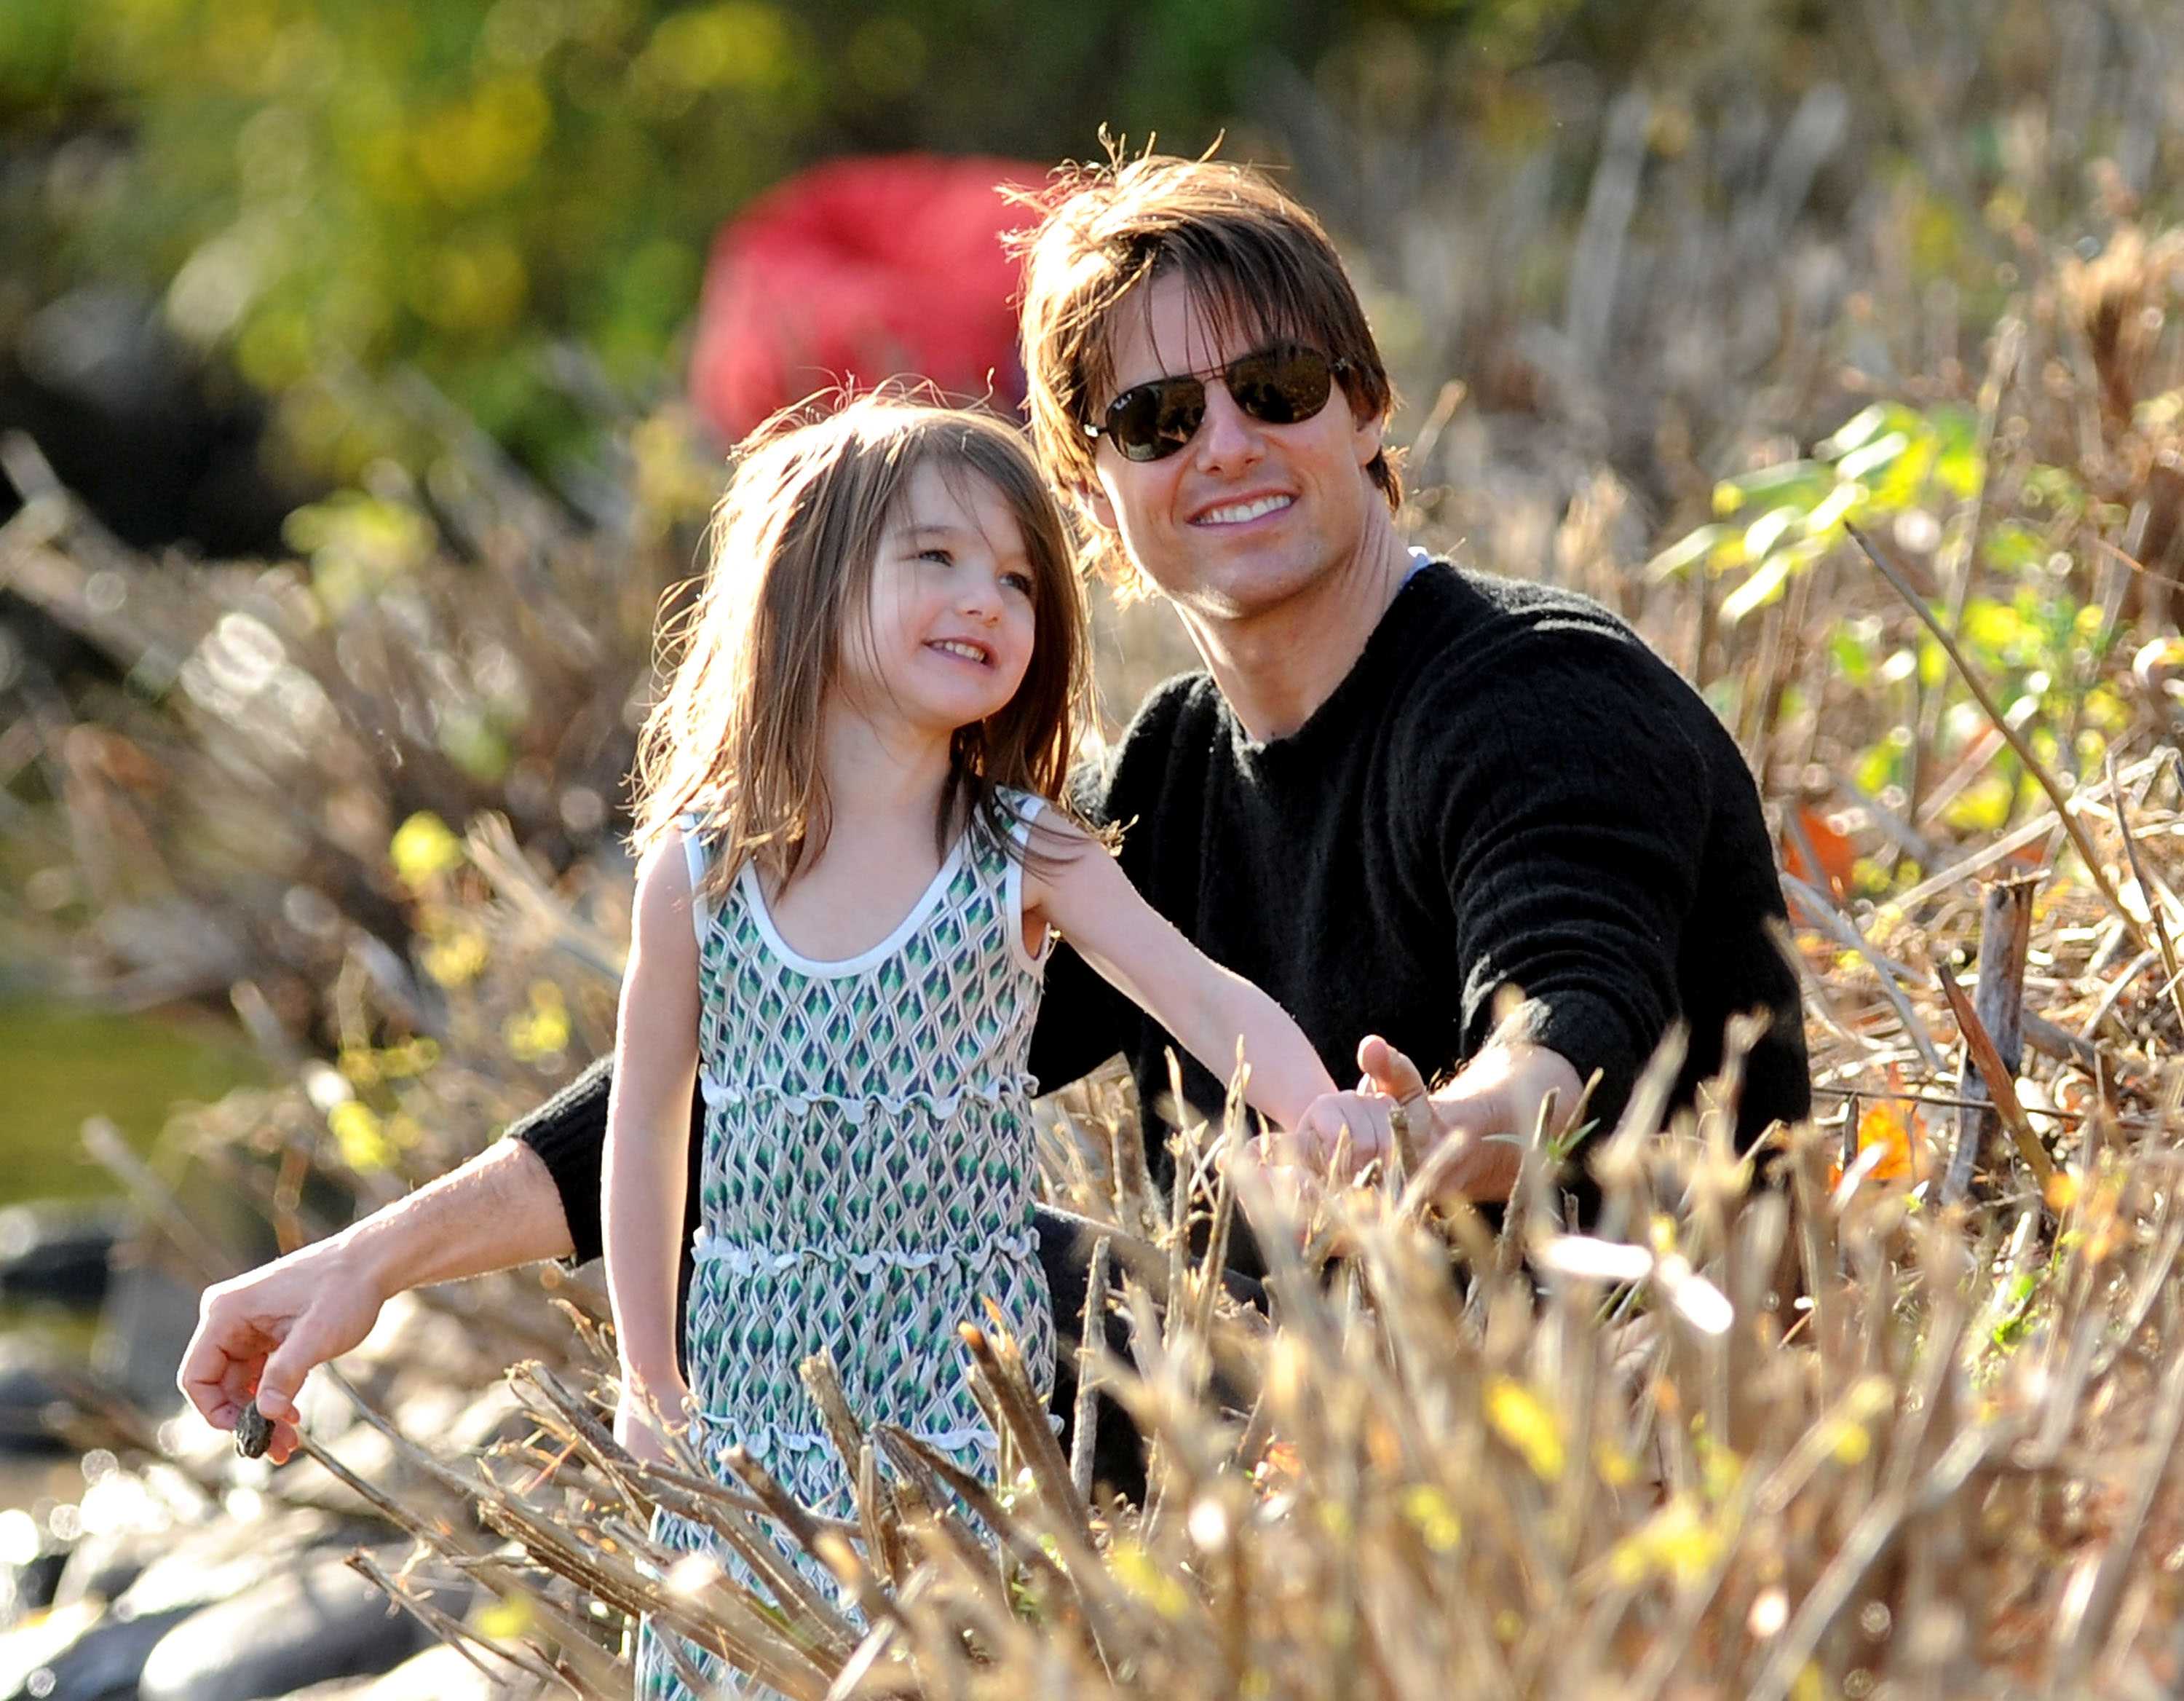 Suri Cruise and Tom Cruise visit Charles River Basin on October 10, 2009, in Cambridge, Massachusetts | Source: Getty Images